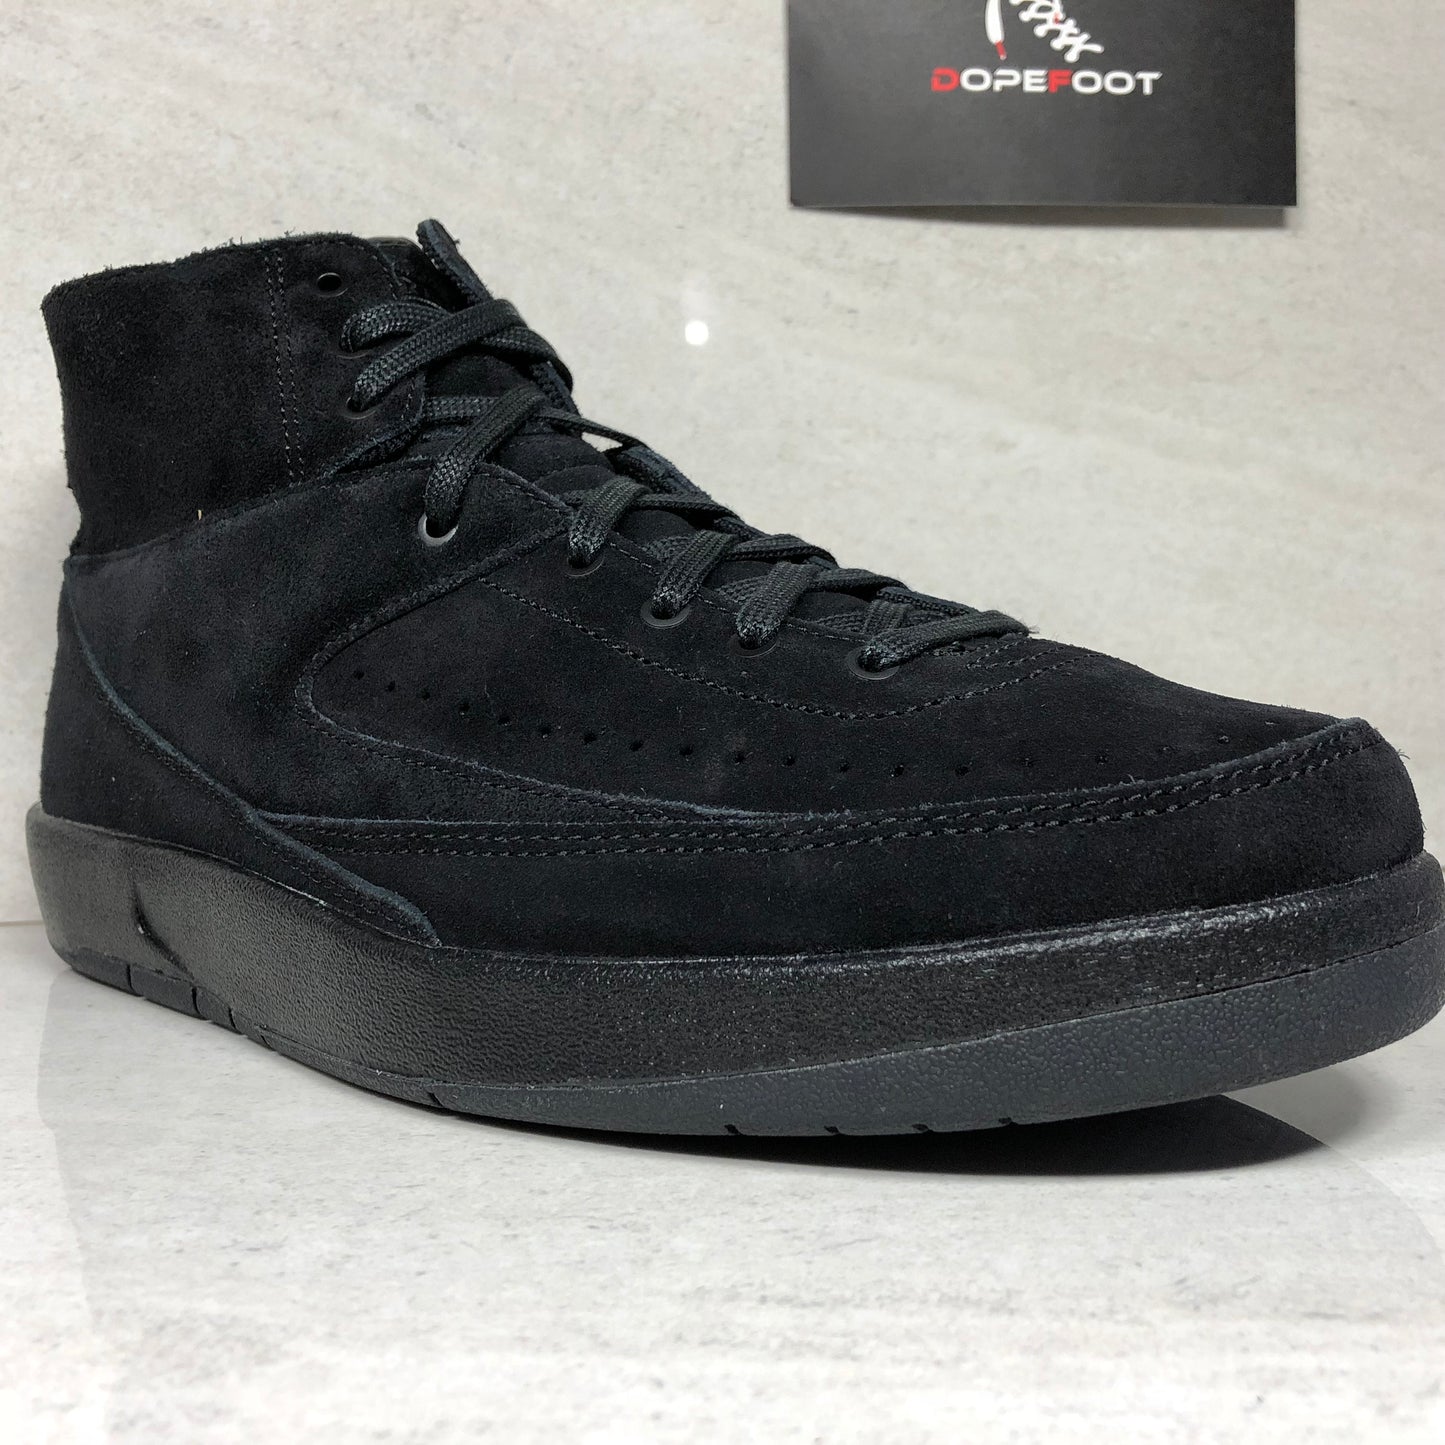 Air Jordan 2 Decon Black Suede - 897521 010 - Taille 8/Taille 8.5/Taille 10.5